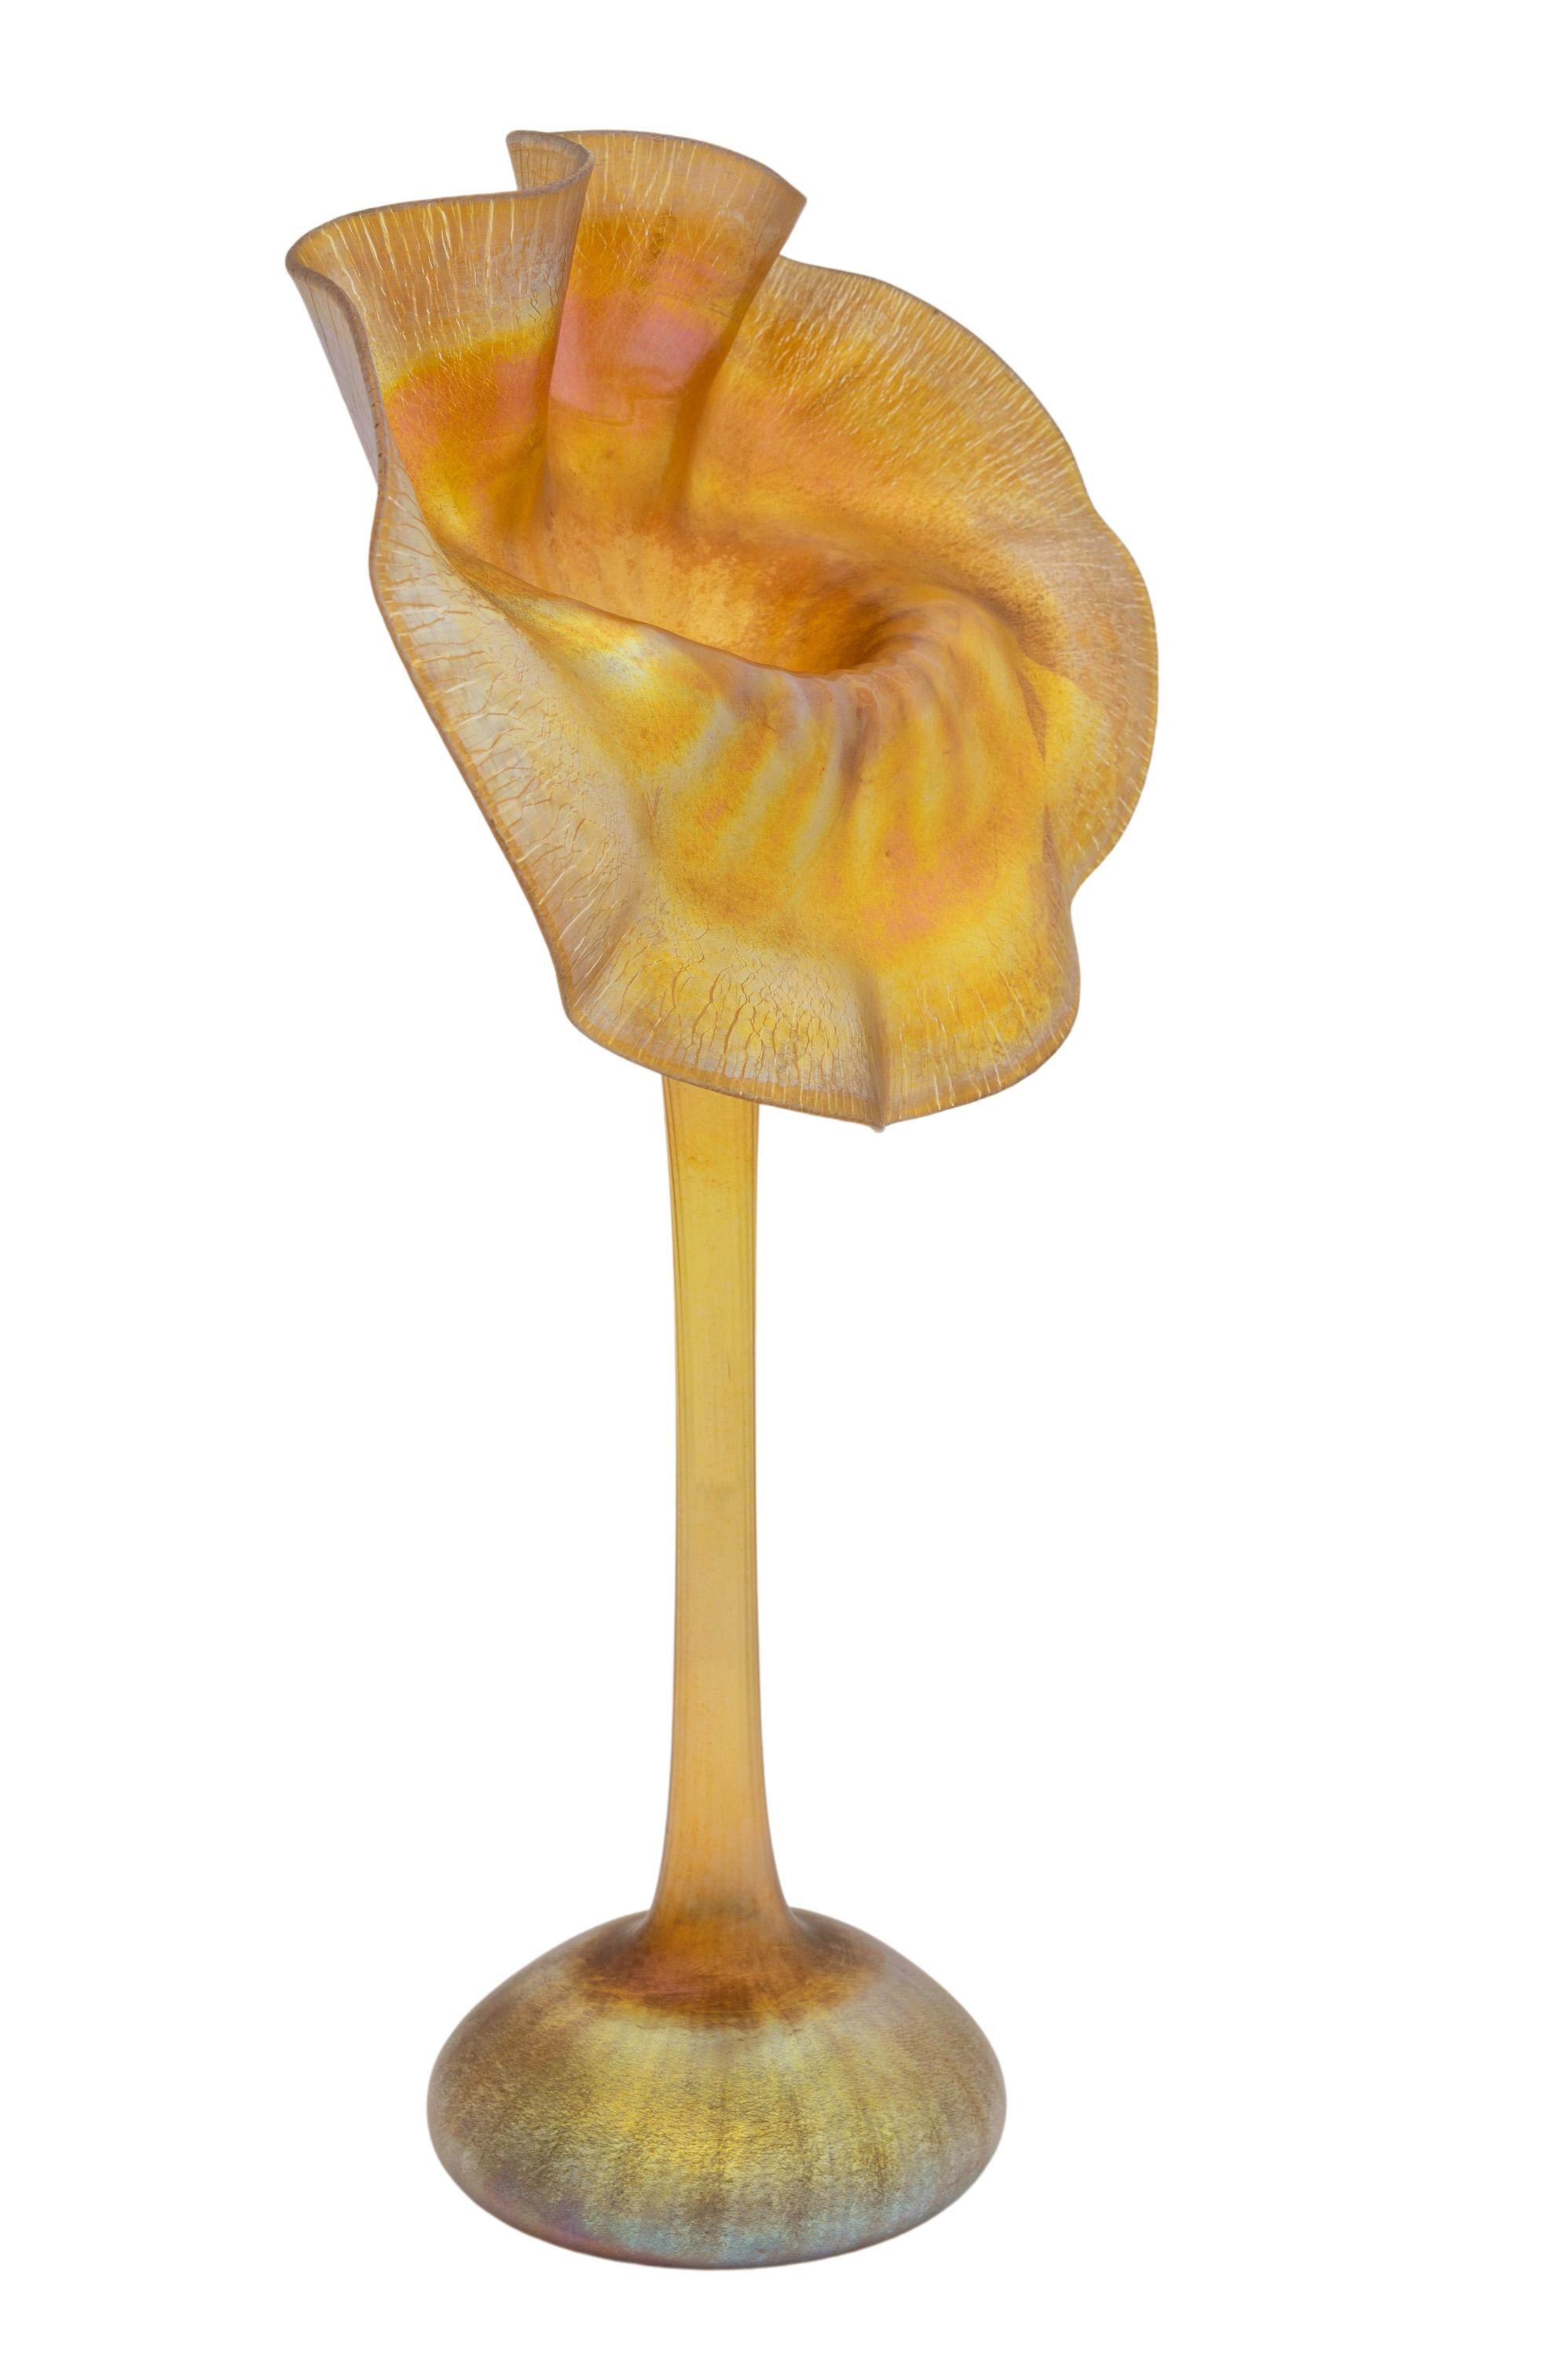 Art Nouveau Jack-in-the-pulpit Vase Louis C. Tiffany New York Tiffany Studios 1906 Yellow  For Sale